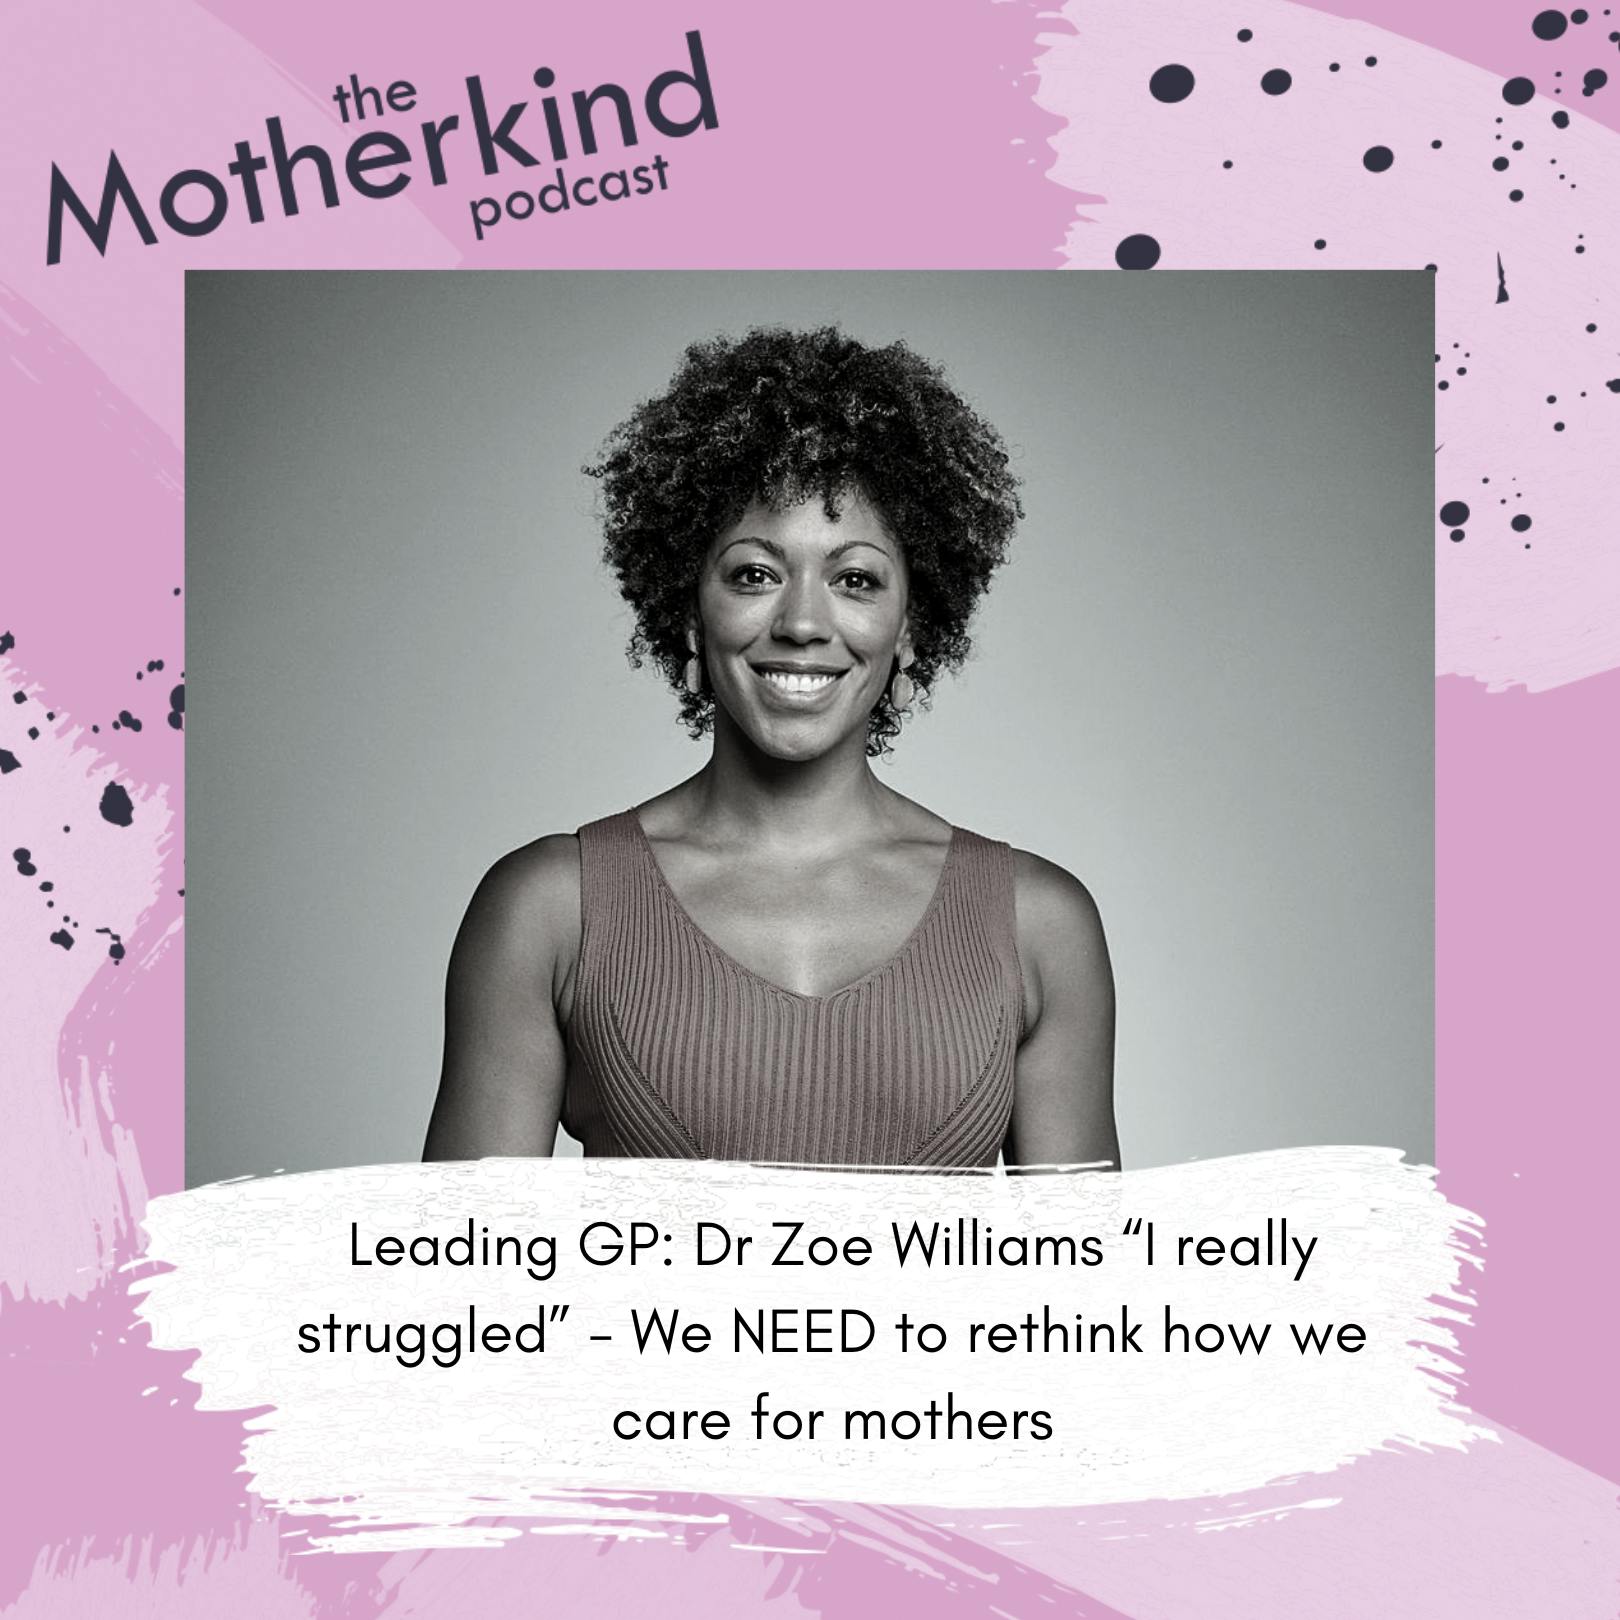 Leading GP: Dr Zoe Williams “I really struggled” - We NEED to rethink how we care for mothers